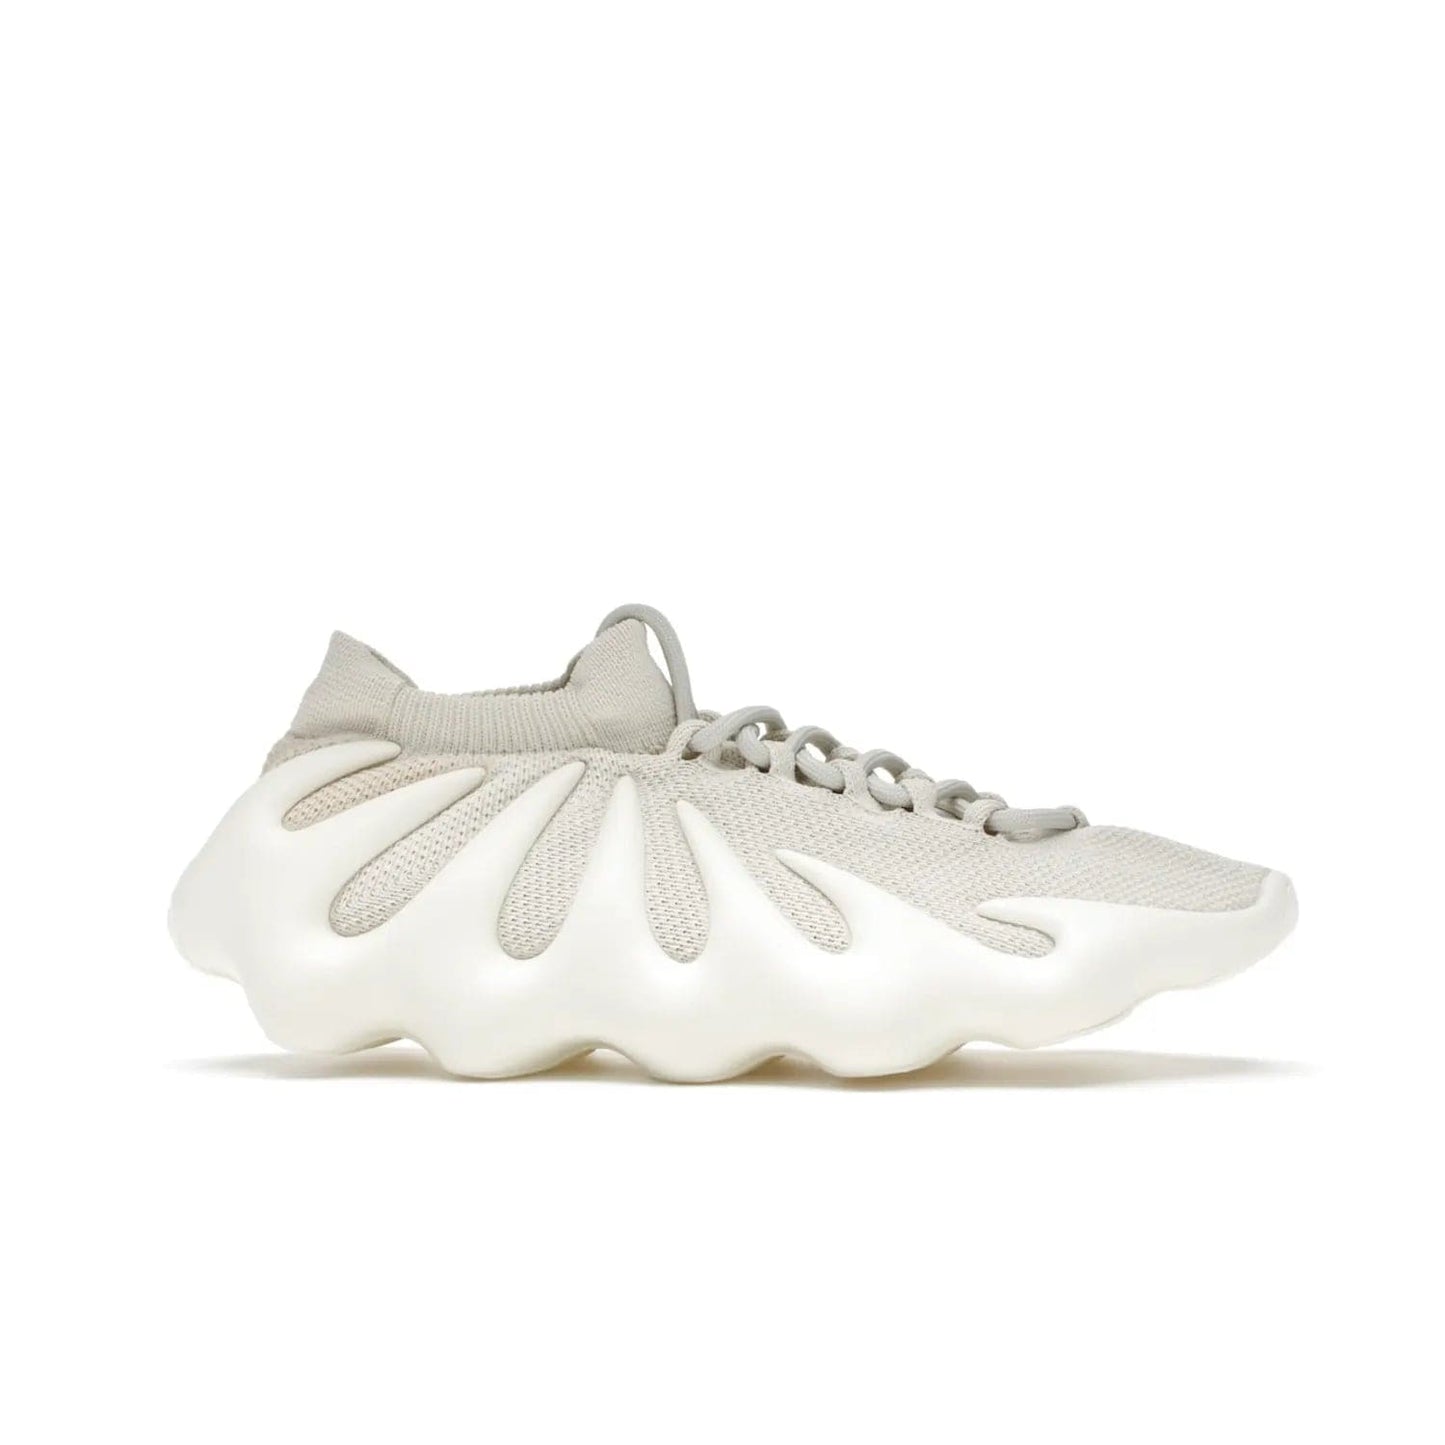 adidas Yeezy 450 Cloud White - Image 2 - Only at www.BallersClubKickz.com - Experience the future with the adidas Yeezy 450 Cloud White. A two-piece design featuring an extreme foam sole and mesh upper, this silhouette is expected to release in March 2021. Get your hands on this striking Cloud White/Cloud White colorway and stand out in the crowd.